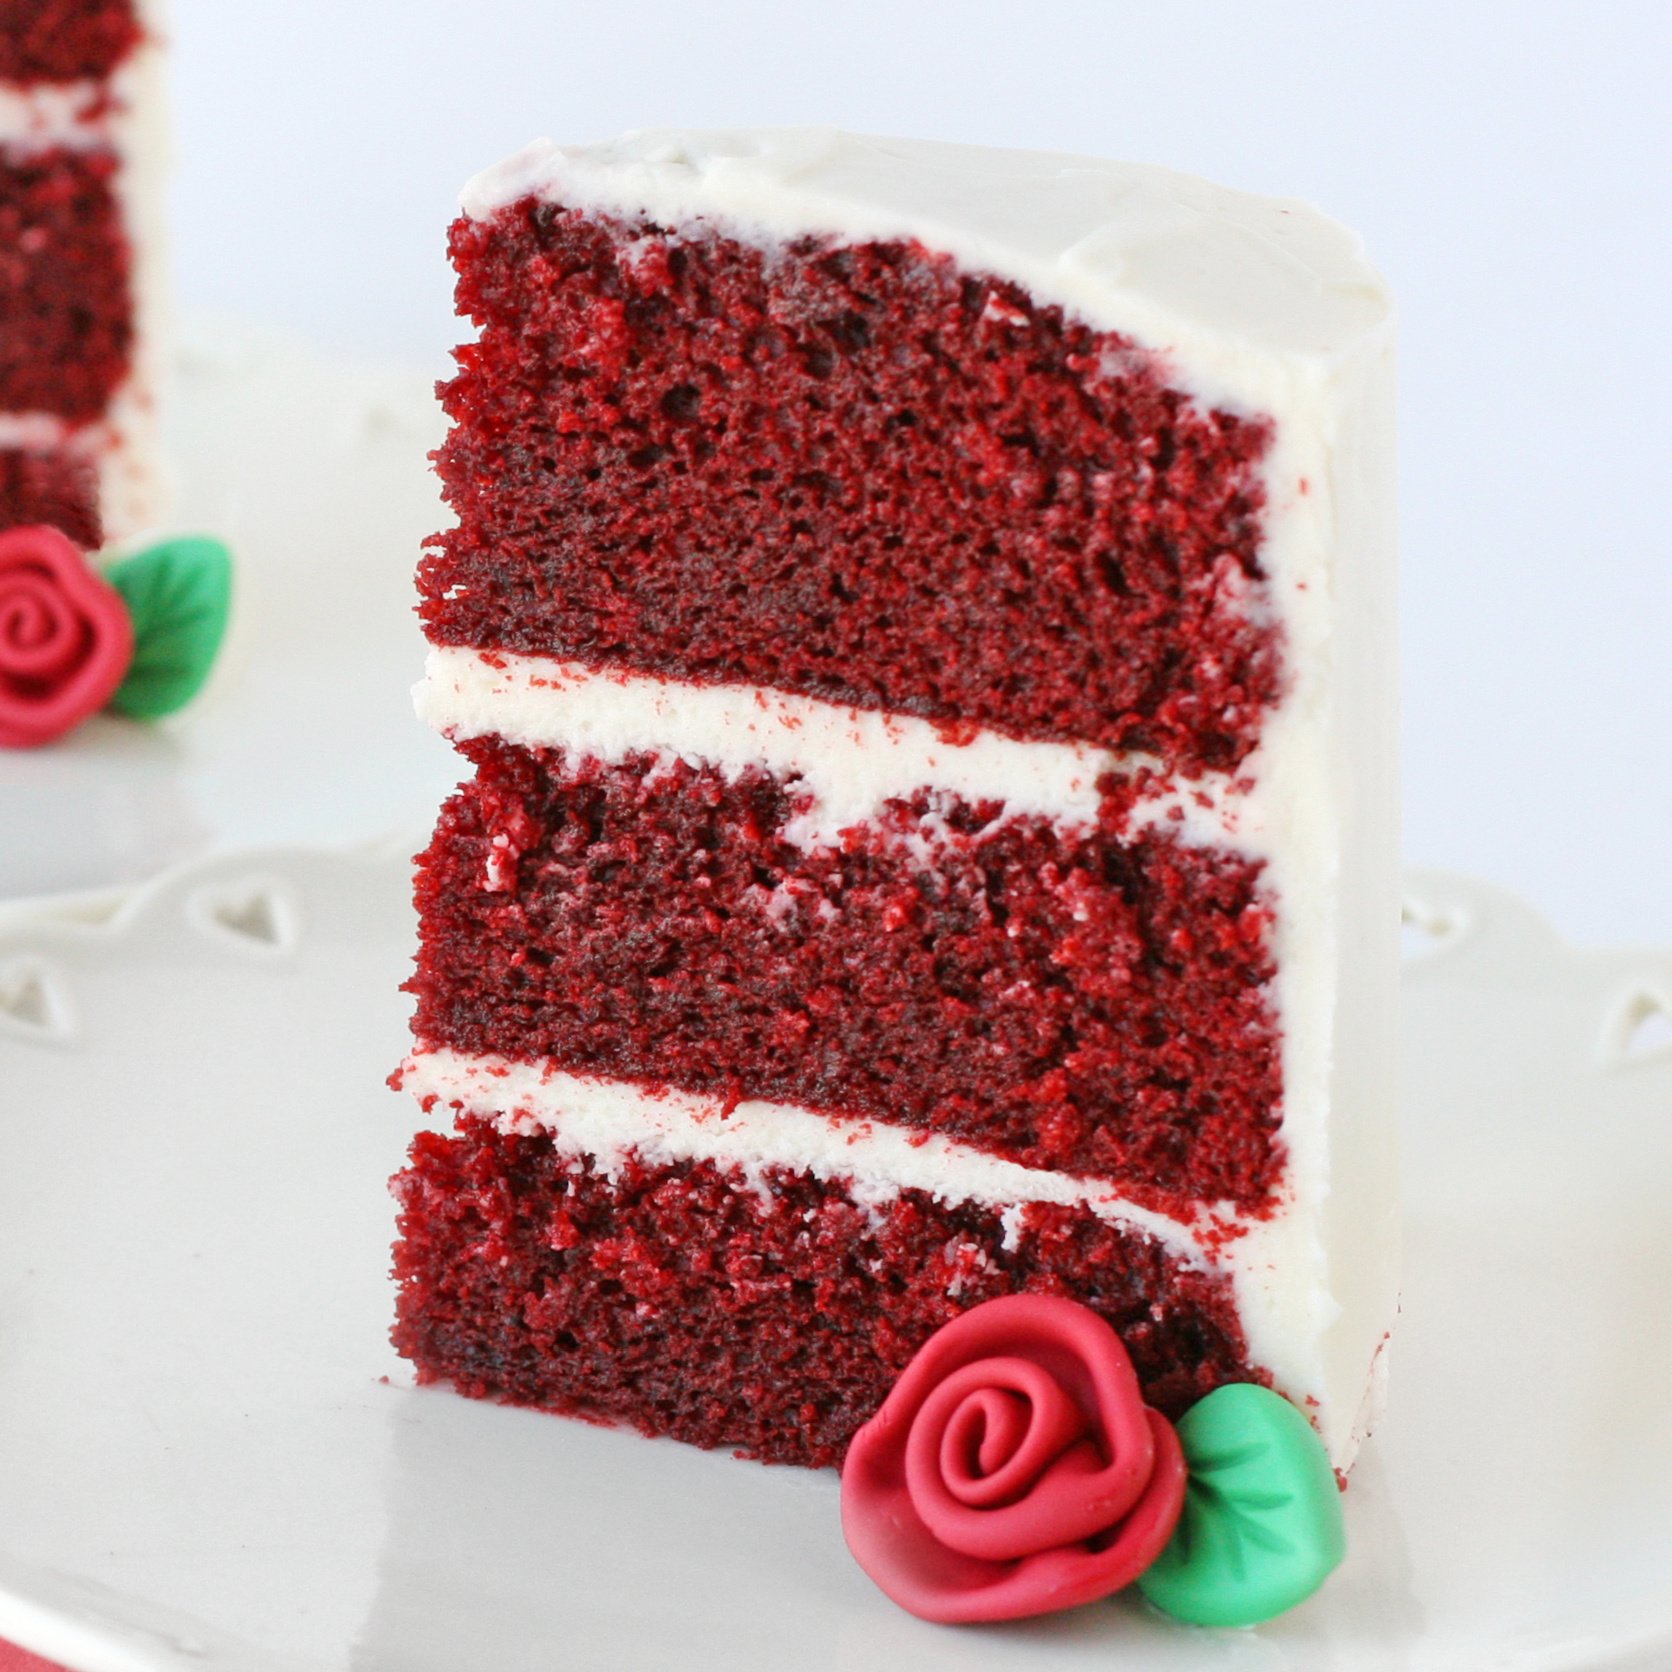 Can You Use Regular Milk Instead Of Buttermilk For Red Velvet Cake Perfect Red Velvet Cake With Cream Cheese Frosting Glorious Treats